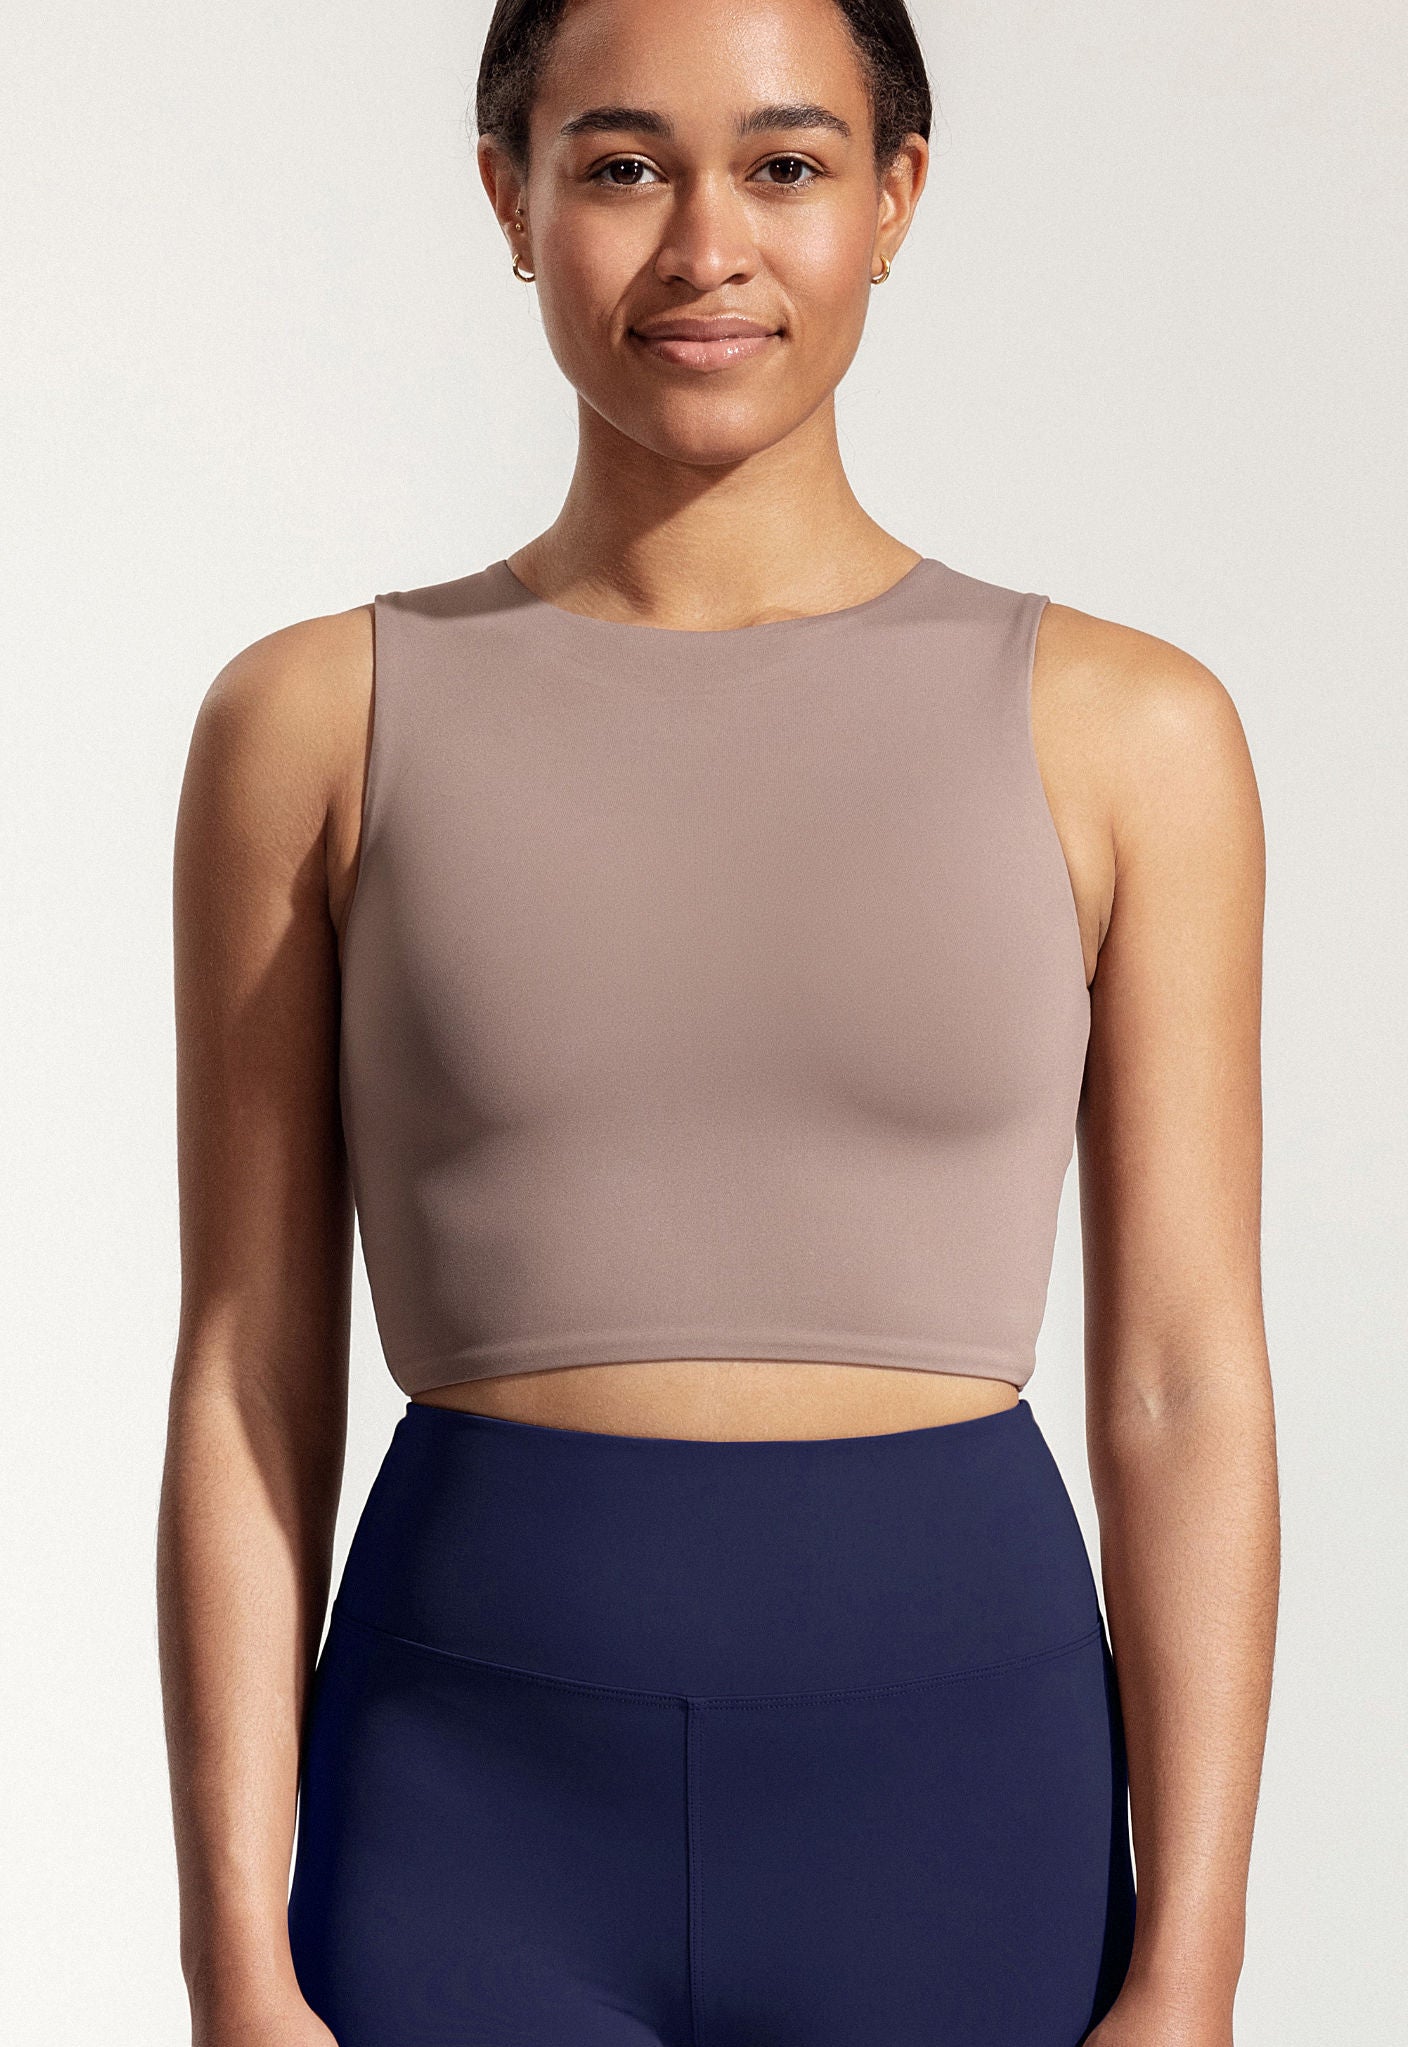 Yoga Top Mica in beige brown – Oy surf Int.